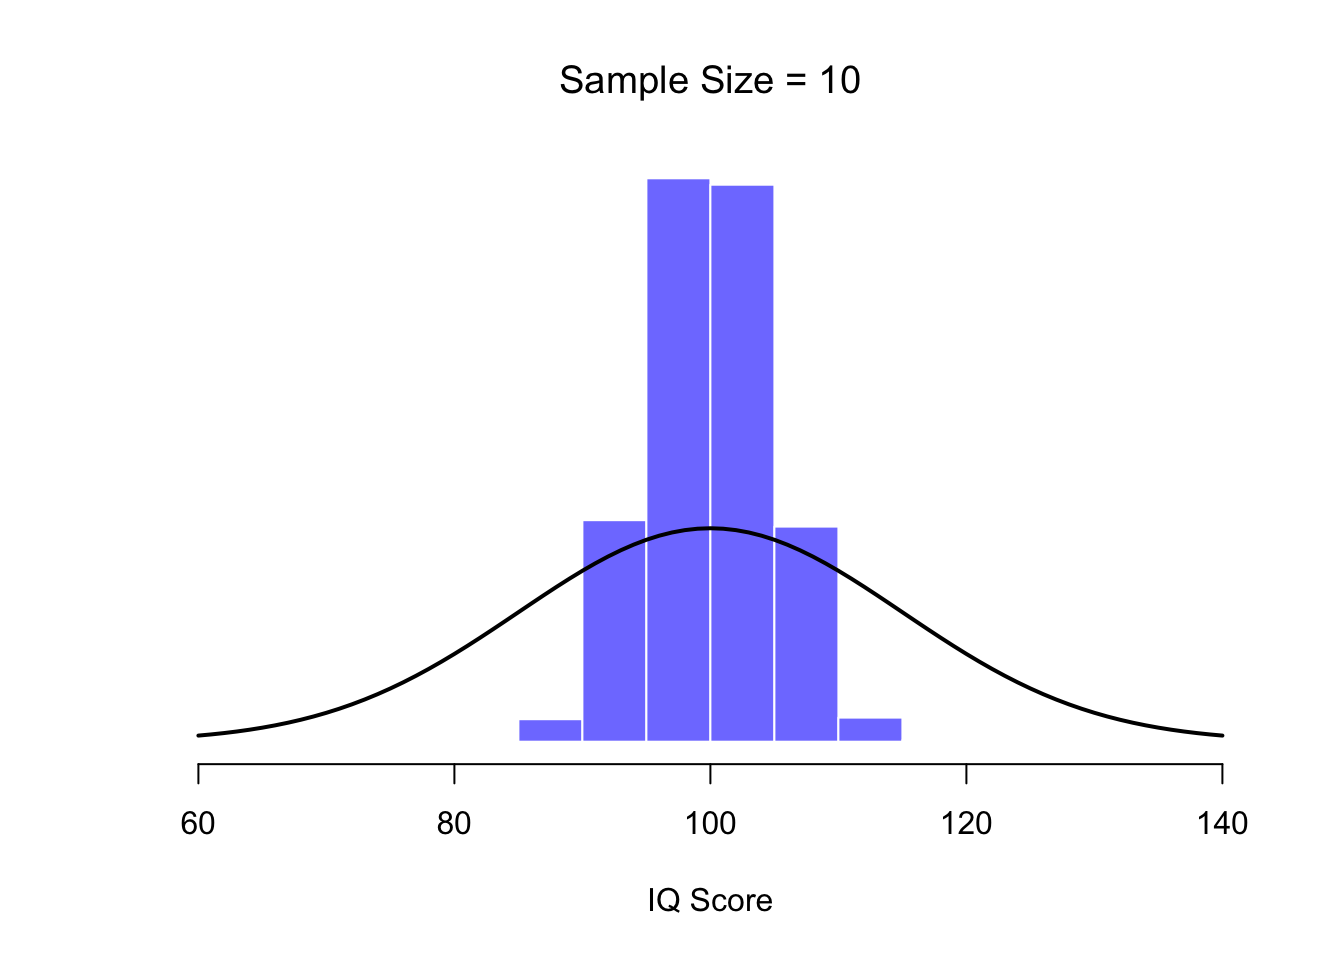 By the time we raise the sample size to 10, we can see that the distribution of sample means tend to be fairly tightly clustered around the true population mean.